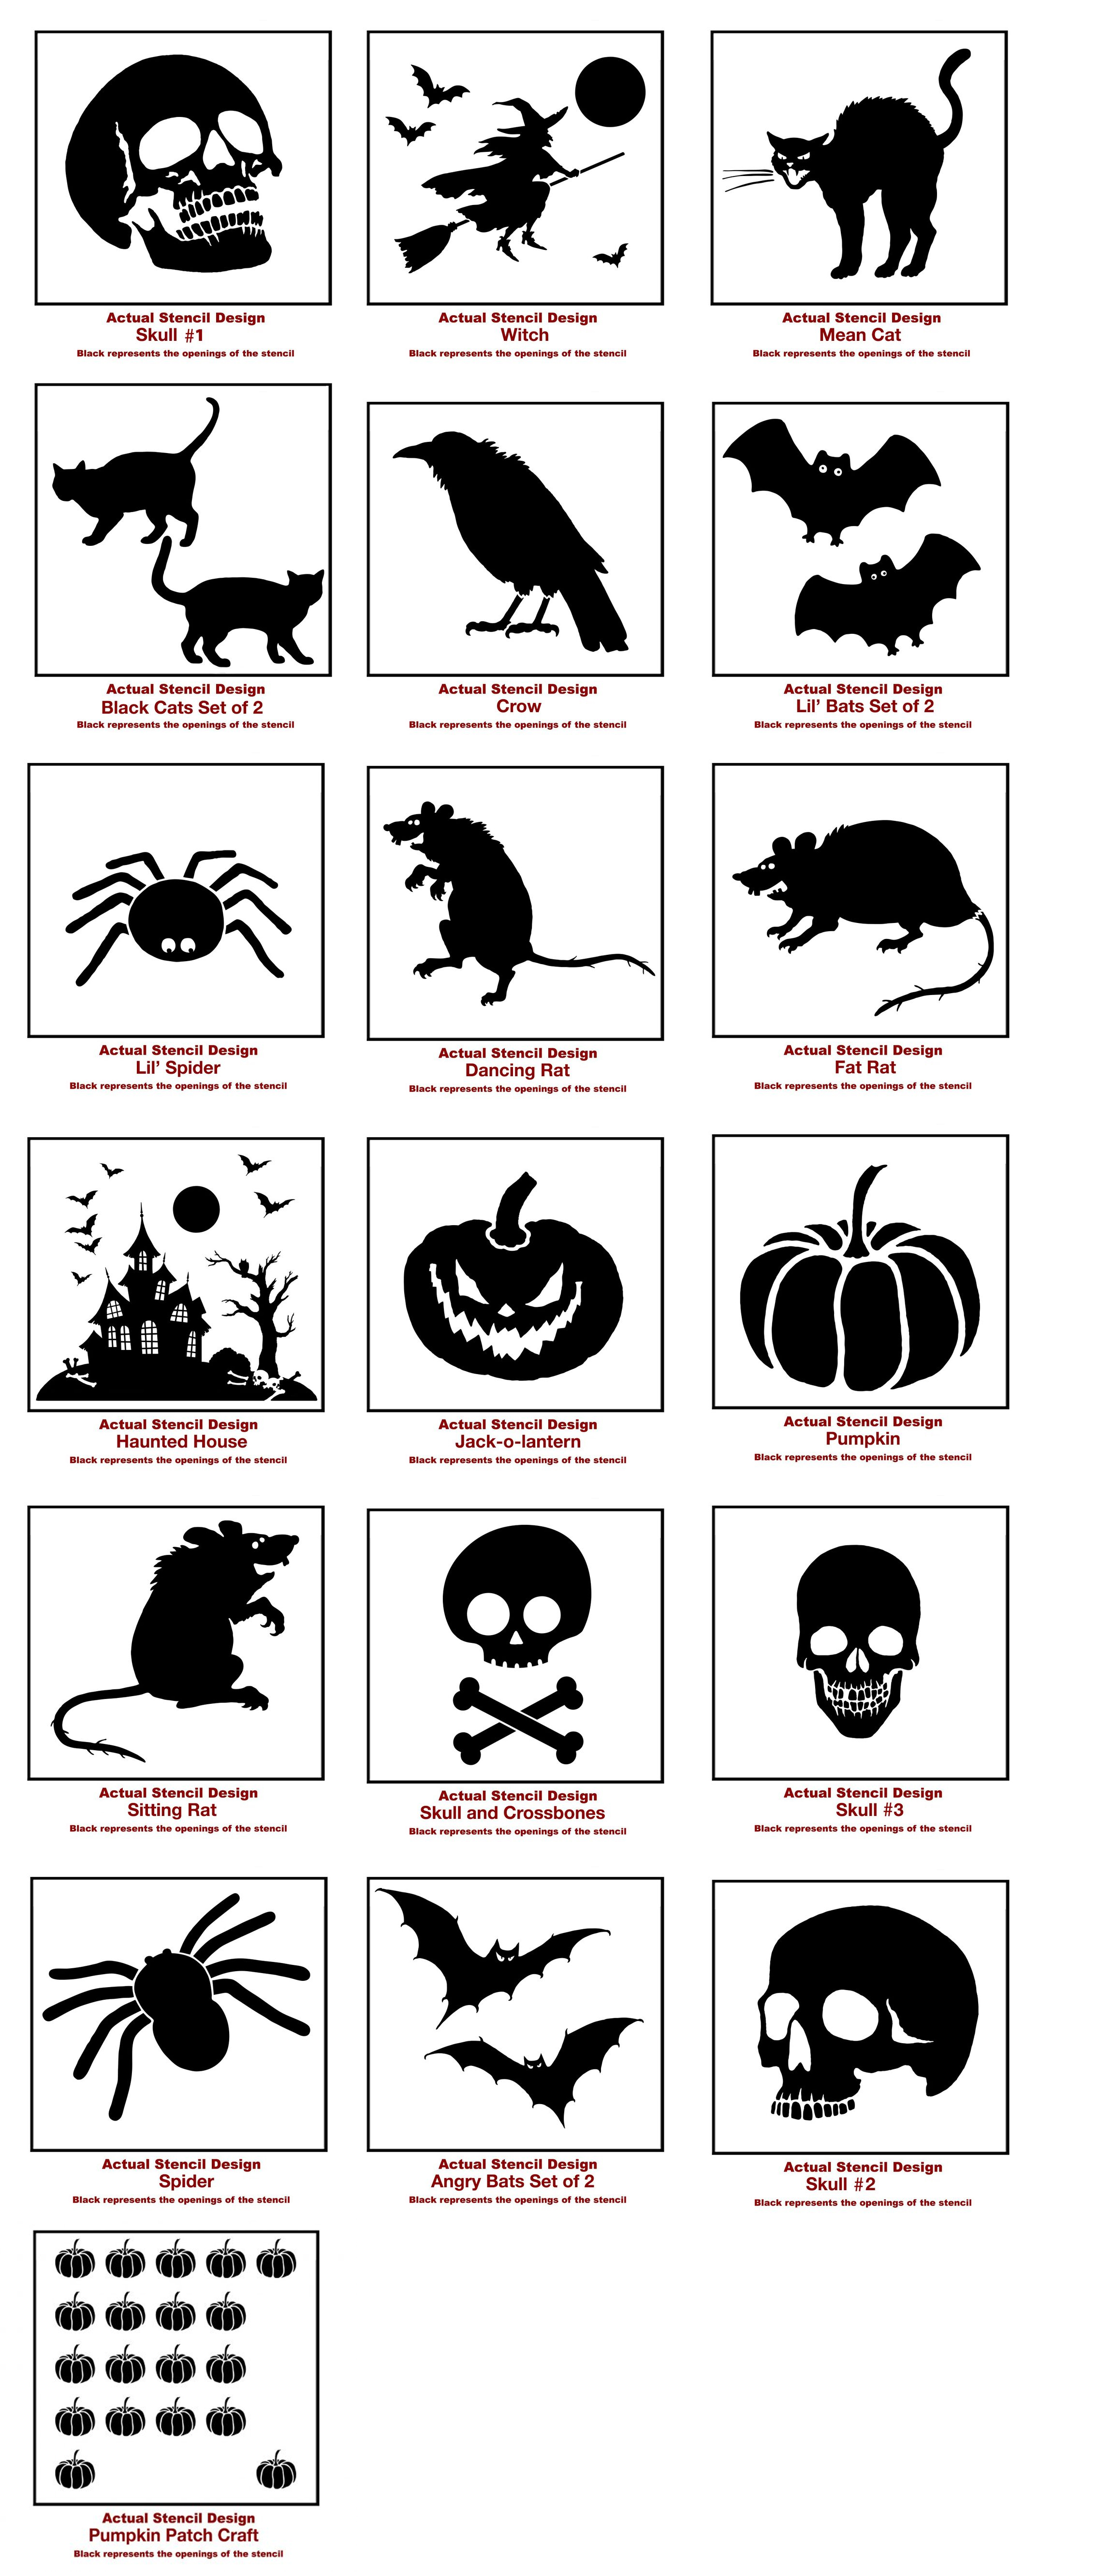 The Halloween Stencil Collection from Cutting Edge Stencils comes in craft and pillow/tote bag sizes. http://www.cuttingedgestencils.com/christmas-stencils-valentine-halloween.html